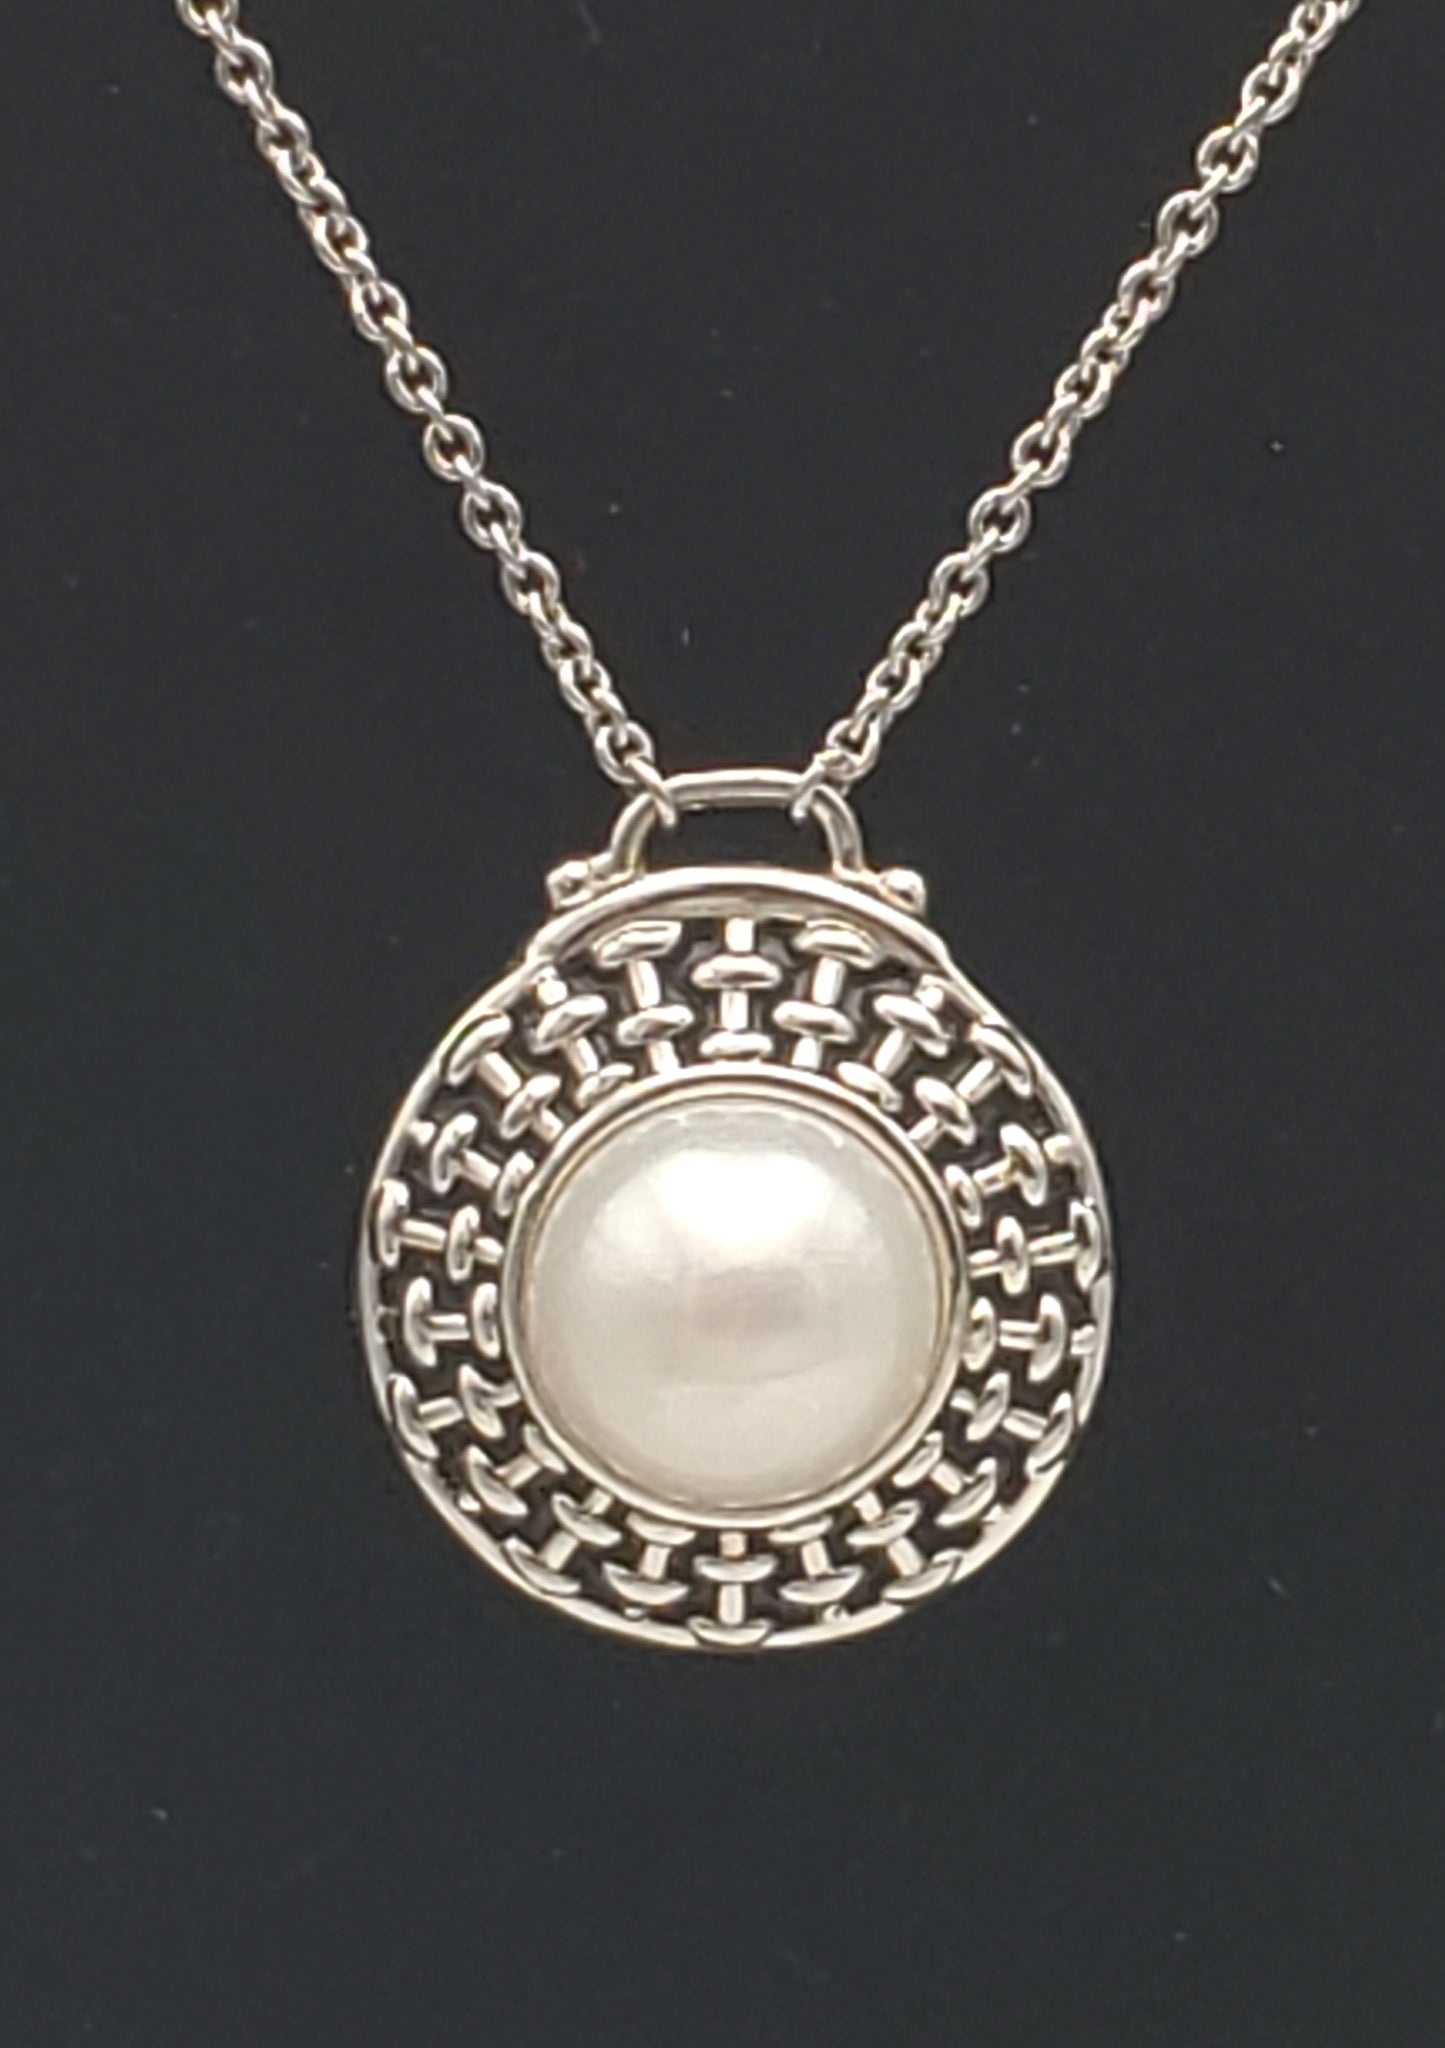 Pearl Basketweave Sterling Silver Pendant Chain Necklace - 18"